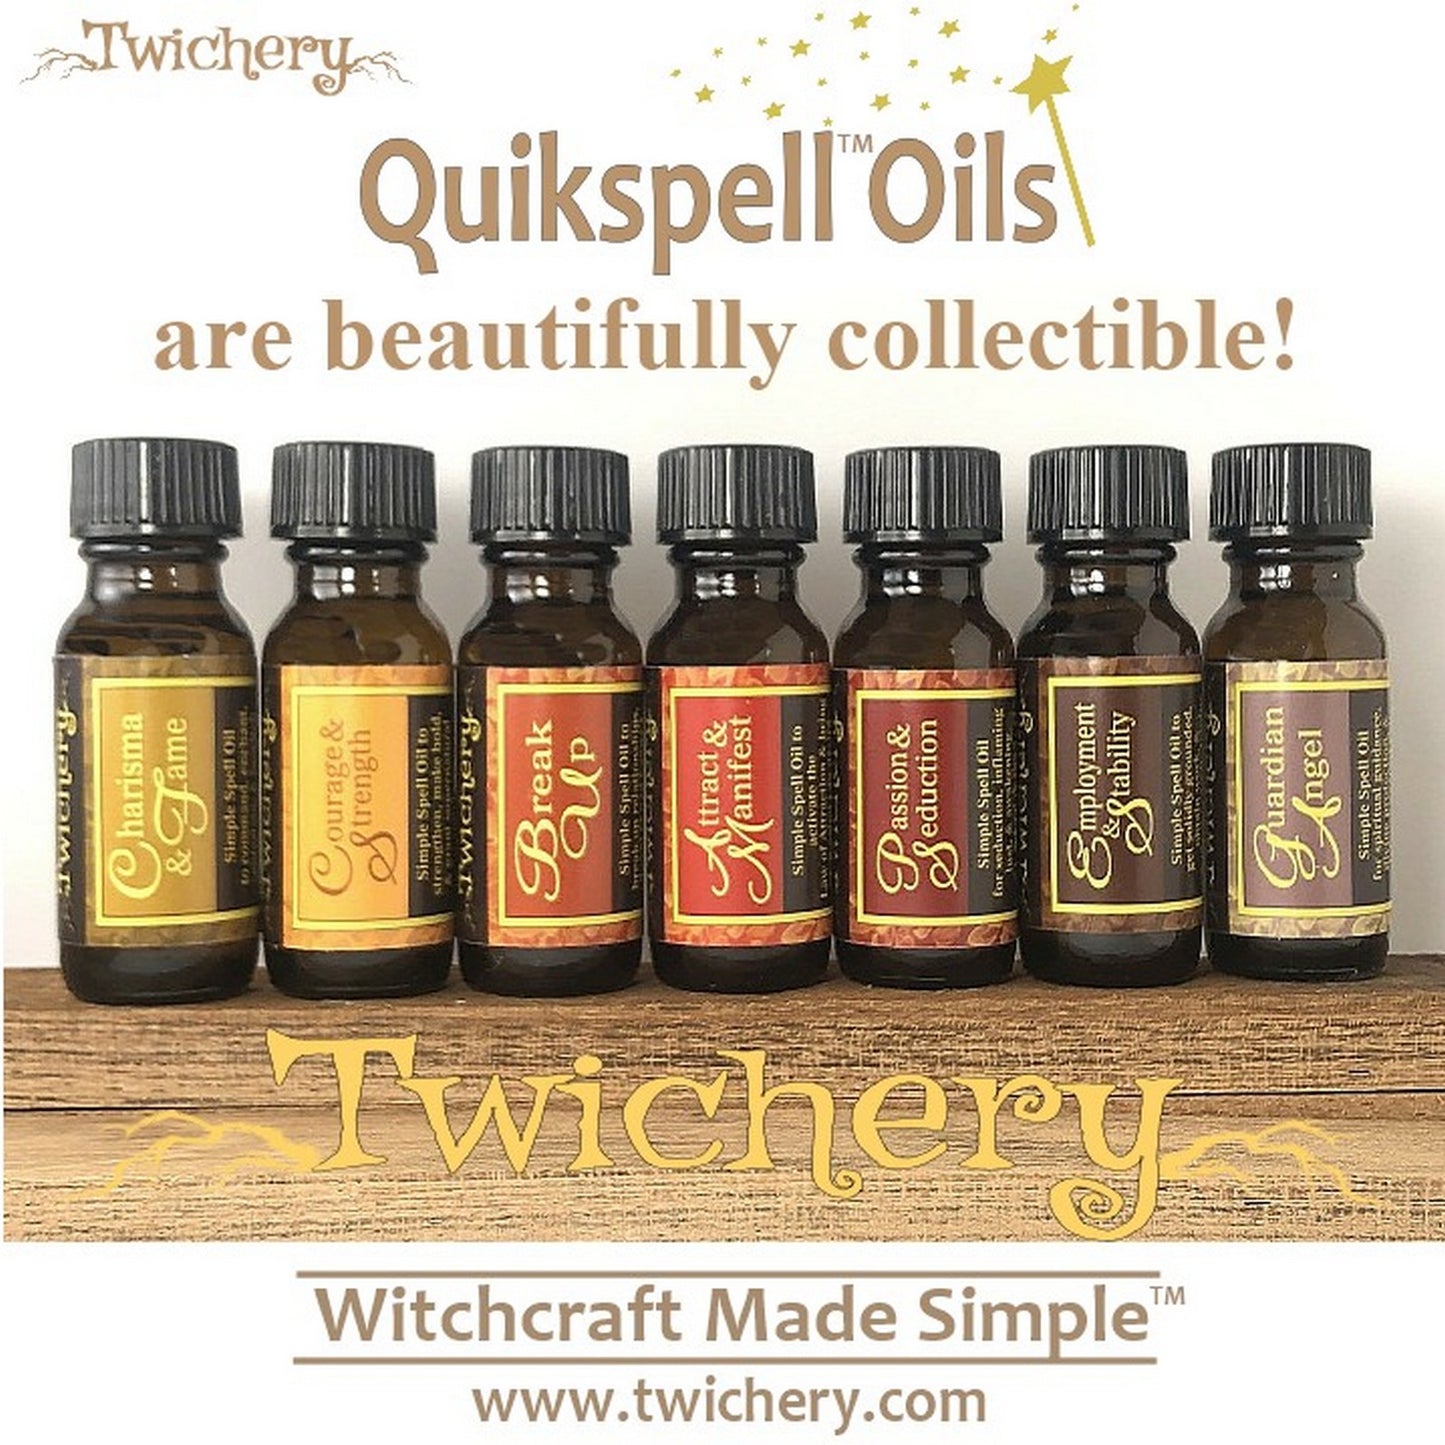 Collect all 24 Twichery Quikspell Oils for all your magickal needs, including magickal control of those who owe you. Hoodoo, Voodoo, Wicca, Witchcraft Made Simple